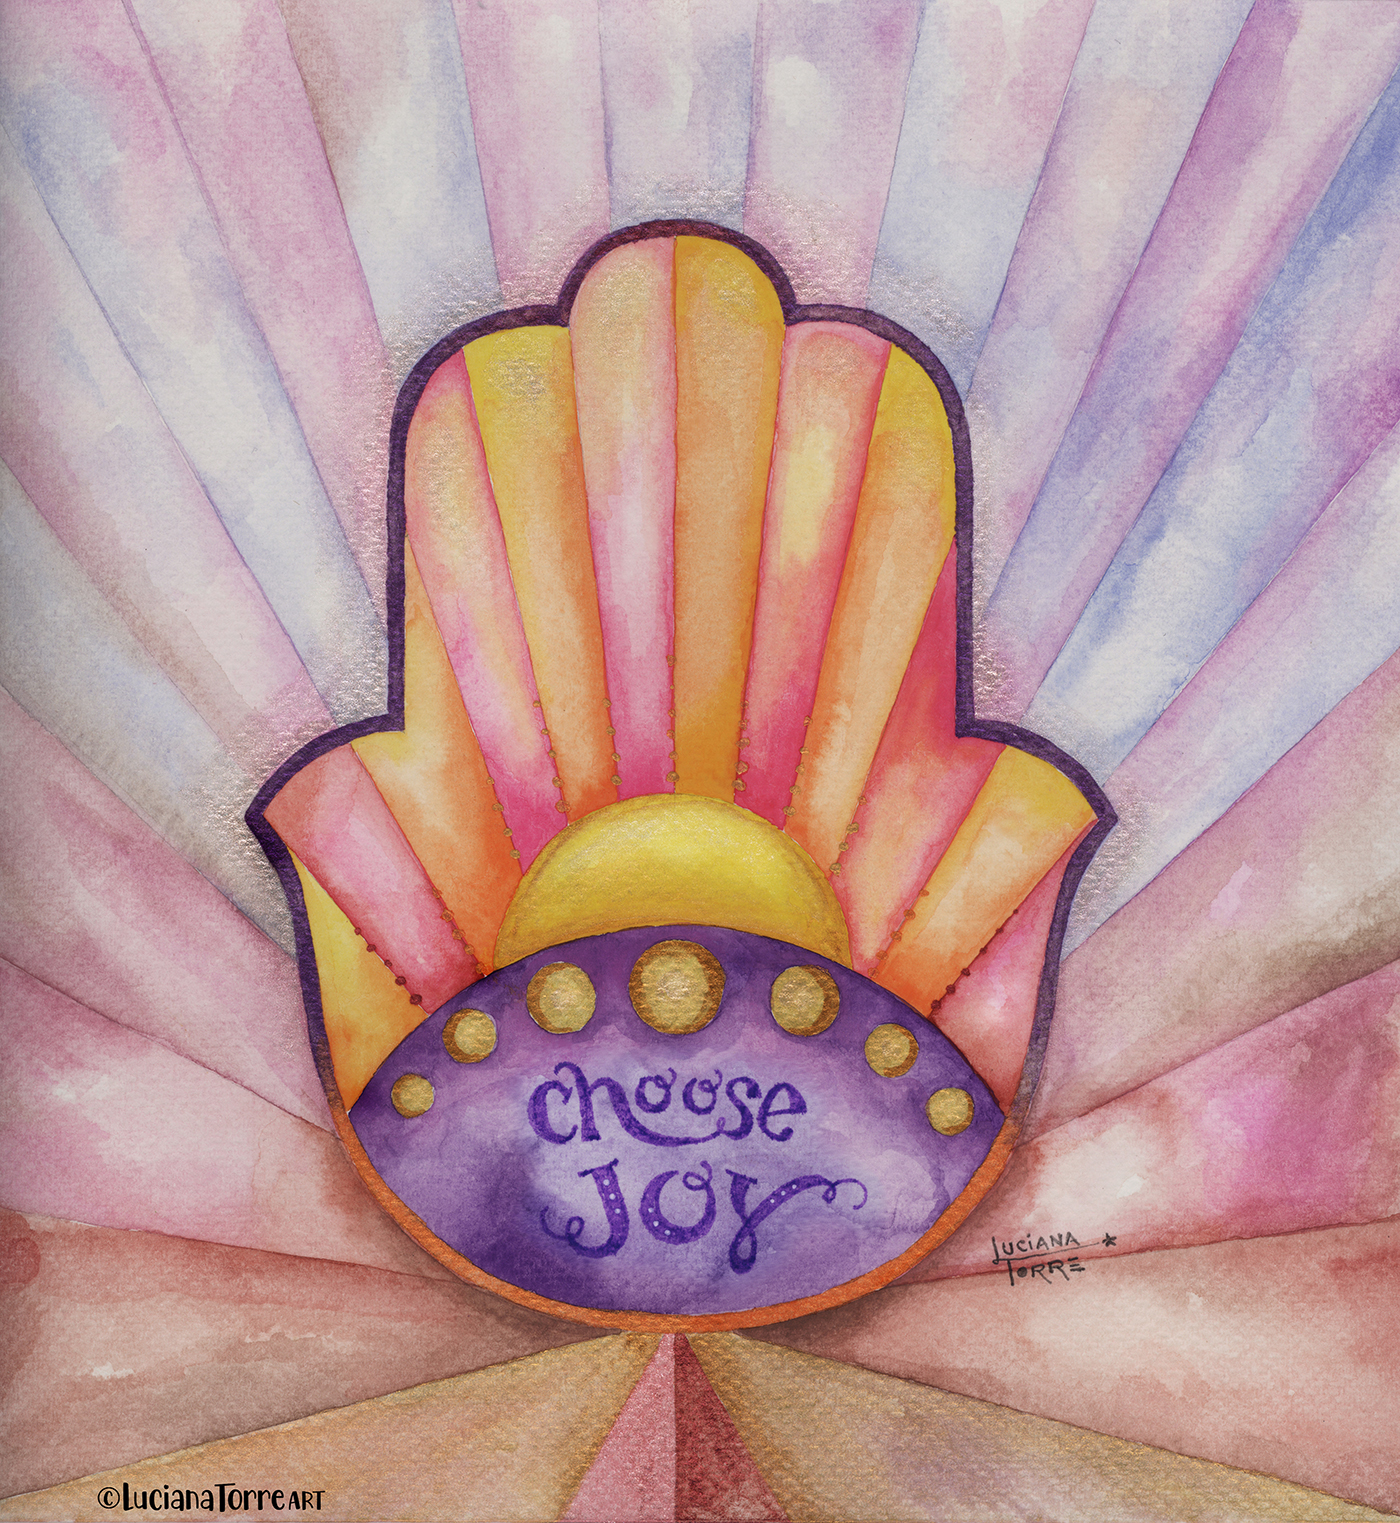 mandala design hand painted in watercolours in earthy orange pink purple violet and golden yellow. boho illustration of sacred geometry art with uplifting positive quote of self care hand drawn by lettering artist Luciana Torre Art ideal for home decor and wall art.